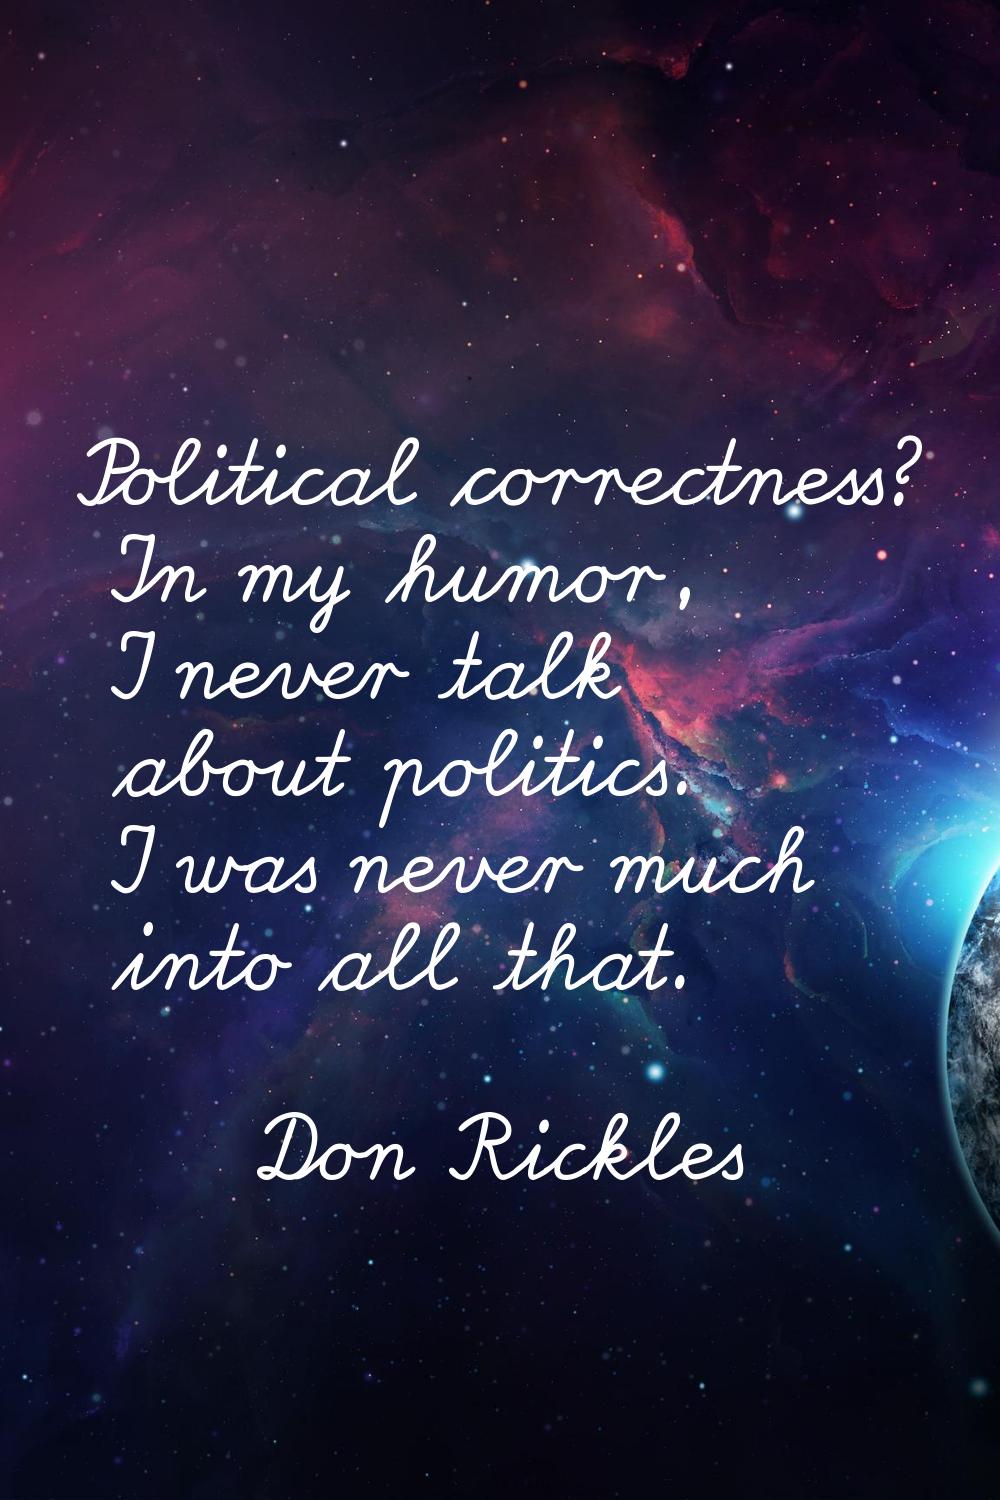 Political correctness? In my humor, I never talk about politics. I was never much into all that.